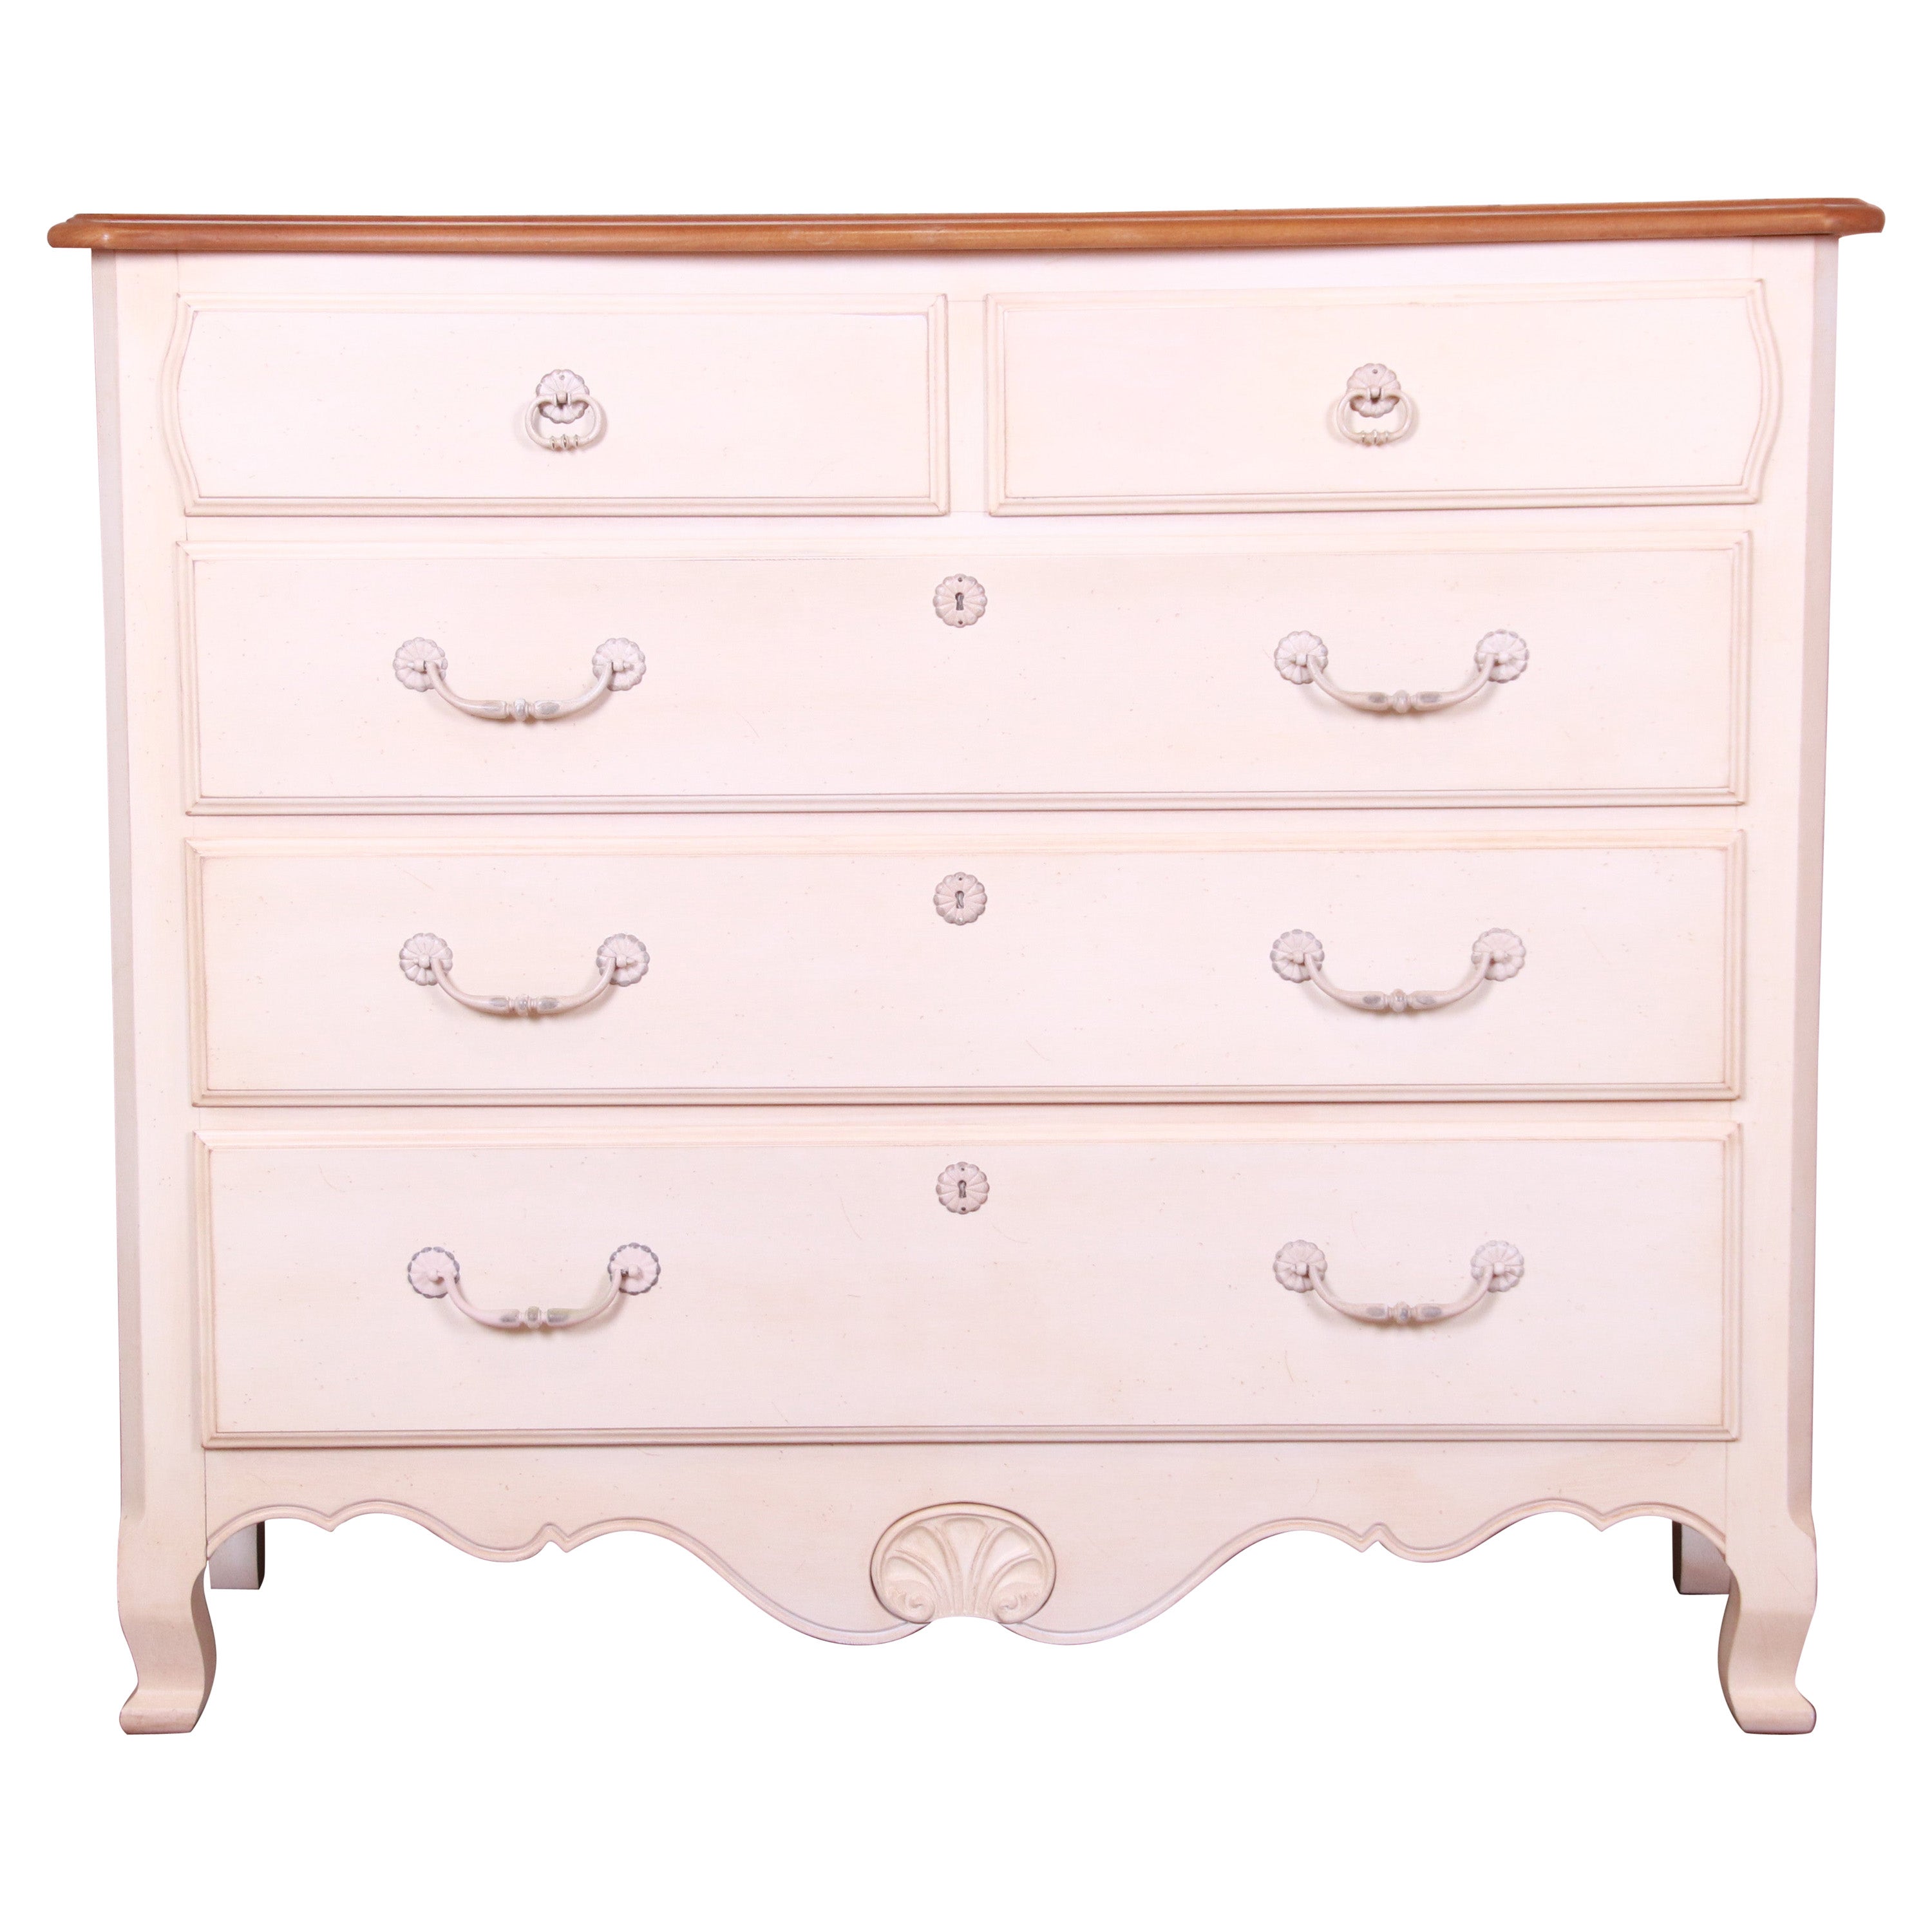 Ethan Allen French Provincial Louis XV White Lacquered Maple Chest of Drawers